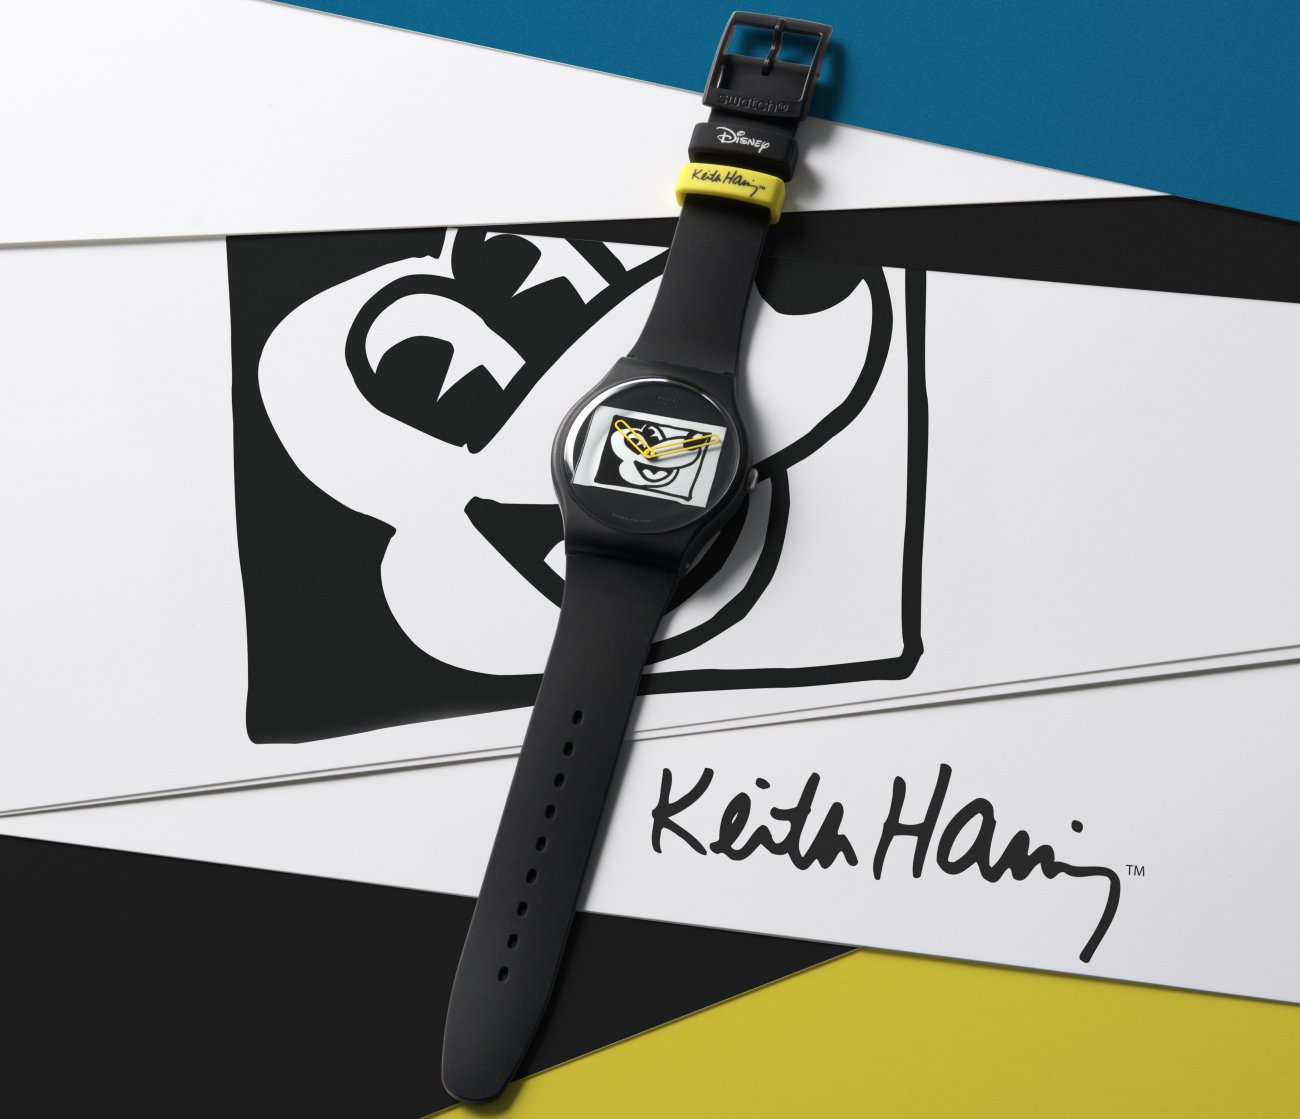 swatch_mickey_mouse_x_keith_haring_mouse_noir_blanc_-_europa_star_watch_magazine_2020